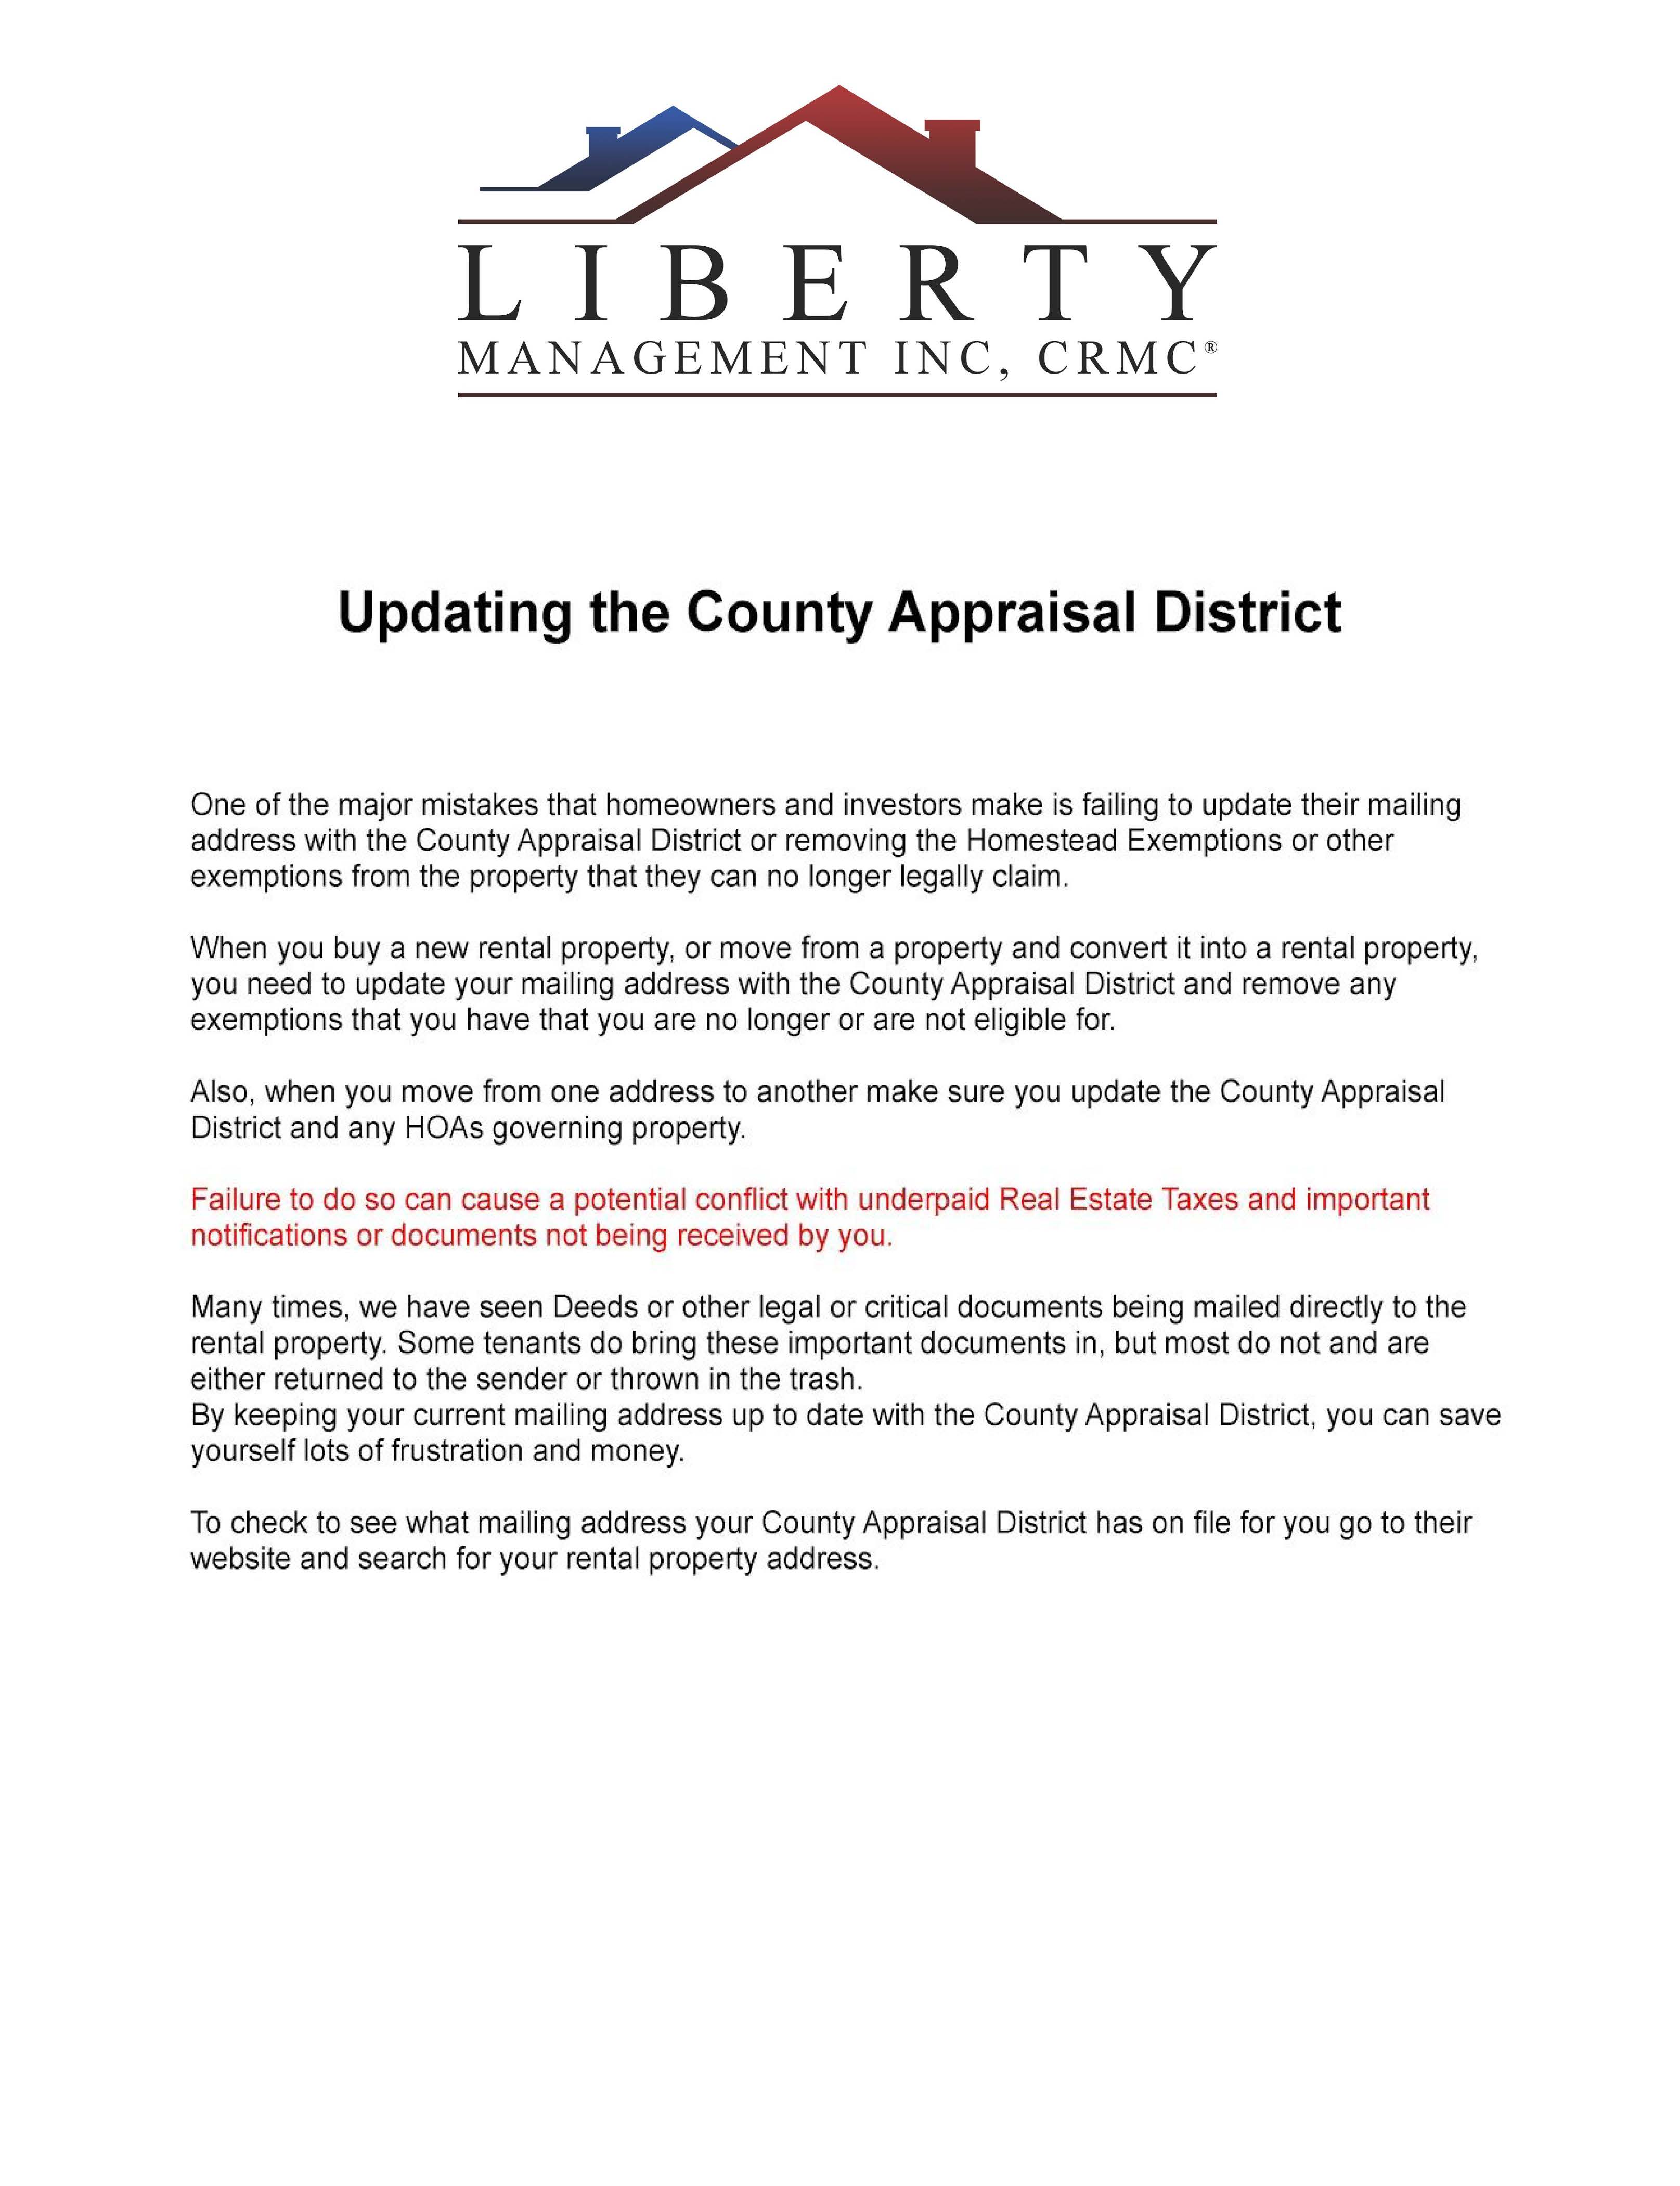 Updating the Bexar County Appraisal District